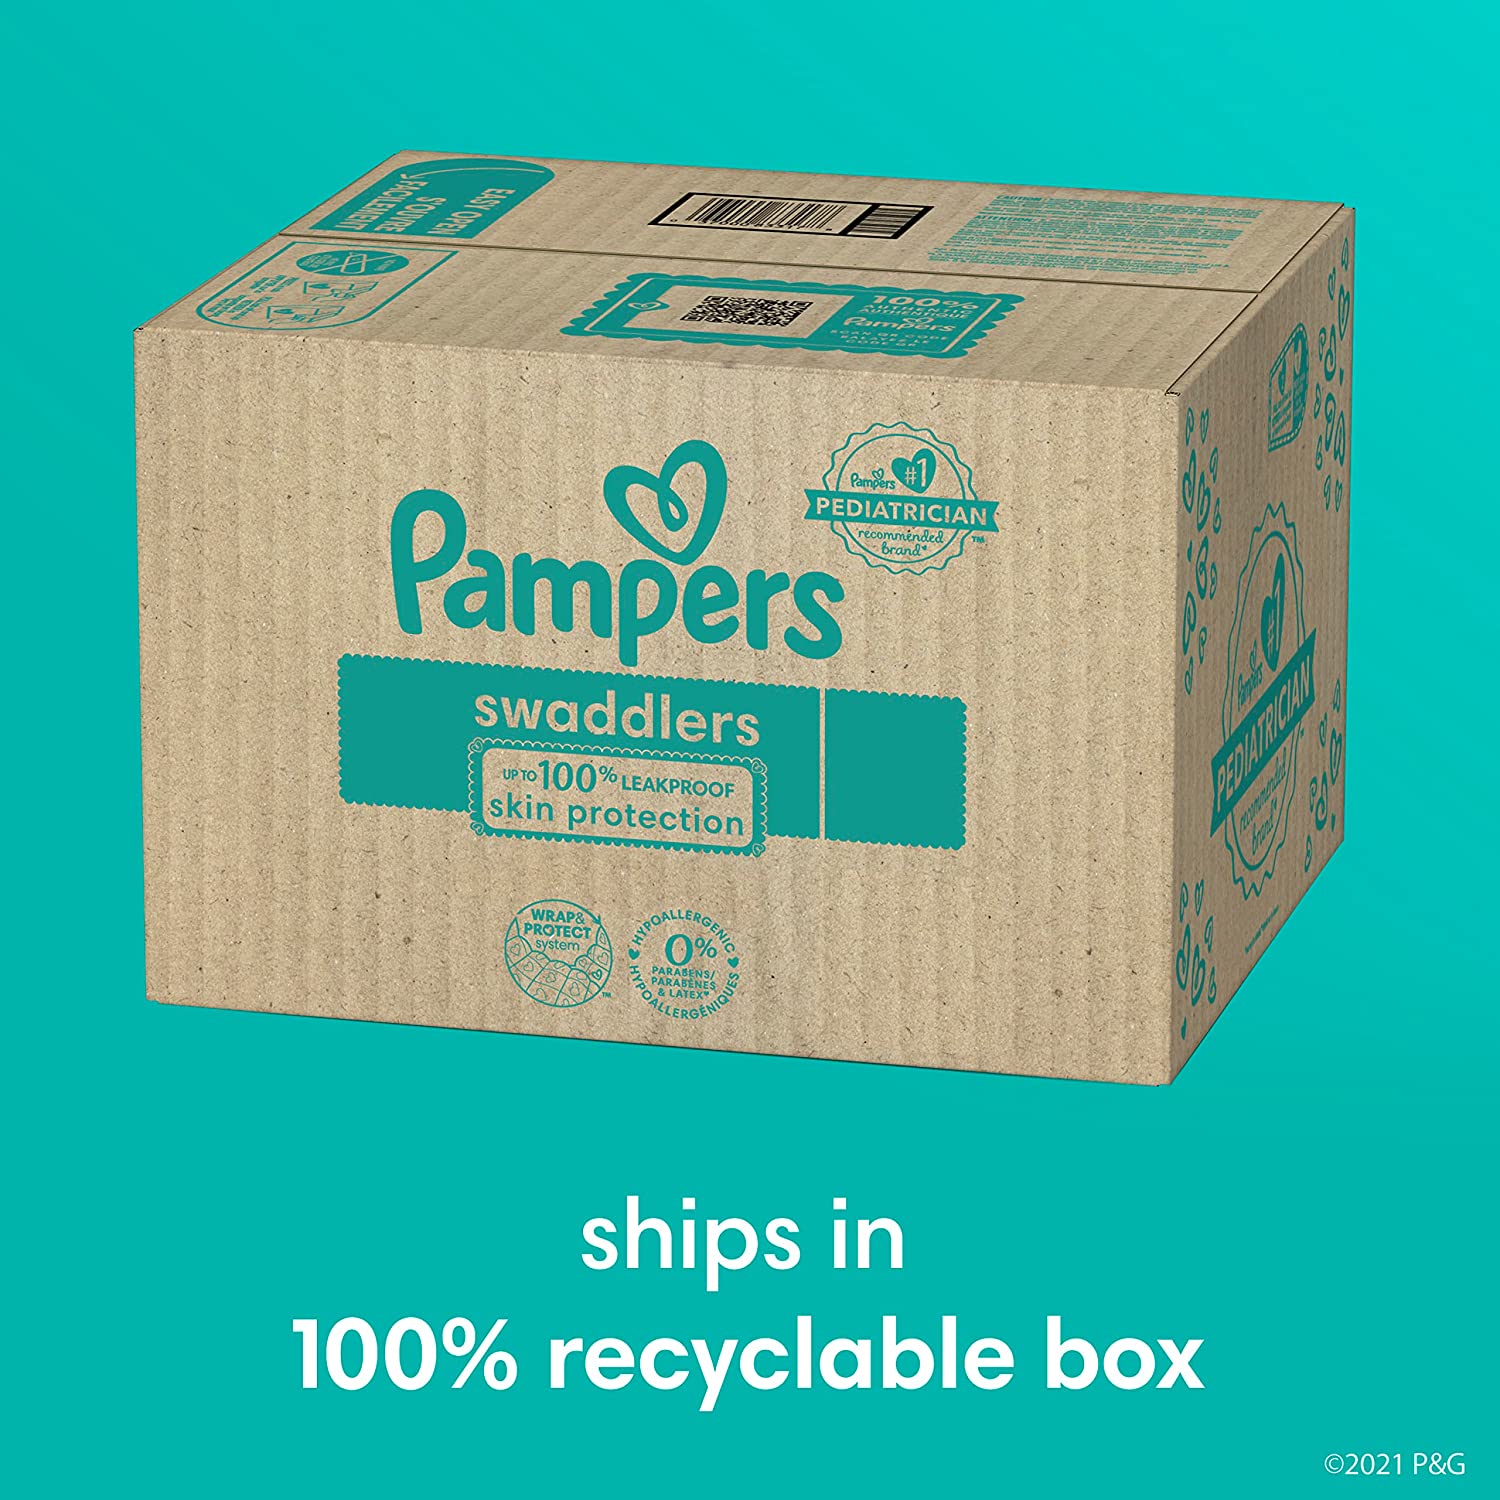 Diapers Size 1/Newborn, 198 Count - Pampers Swaddlers Disposable Baby Diapers (Packaging & Prints May Vary) as low as $30.37- $33.94